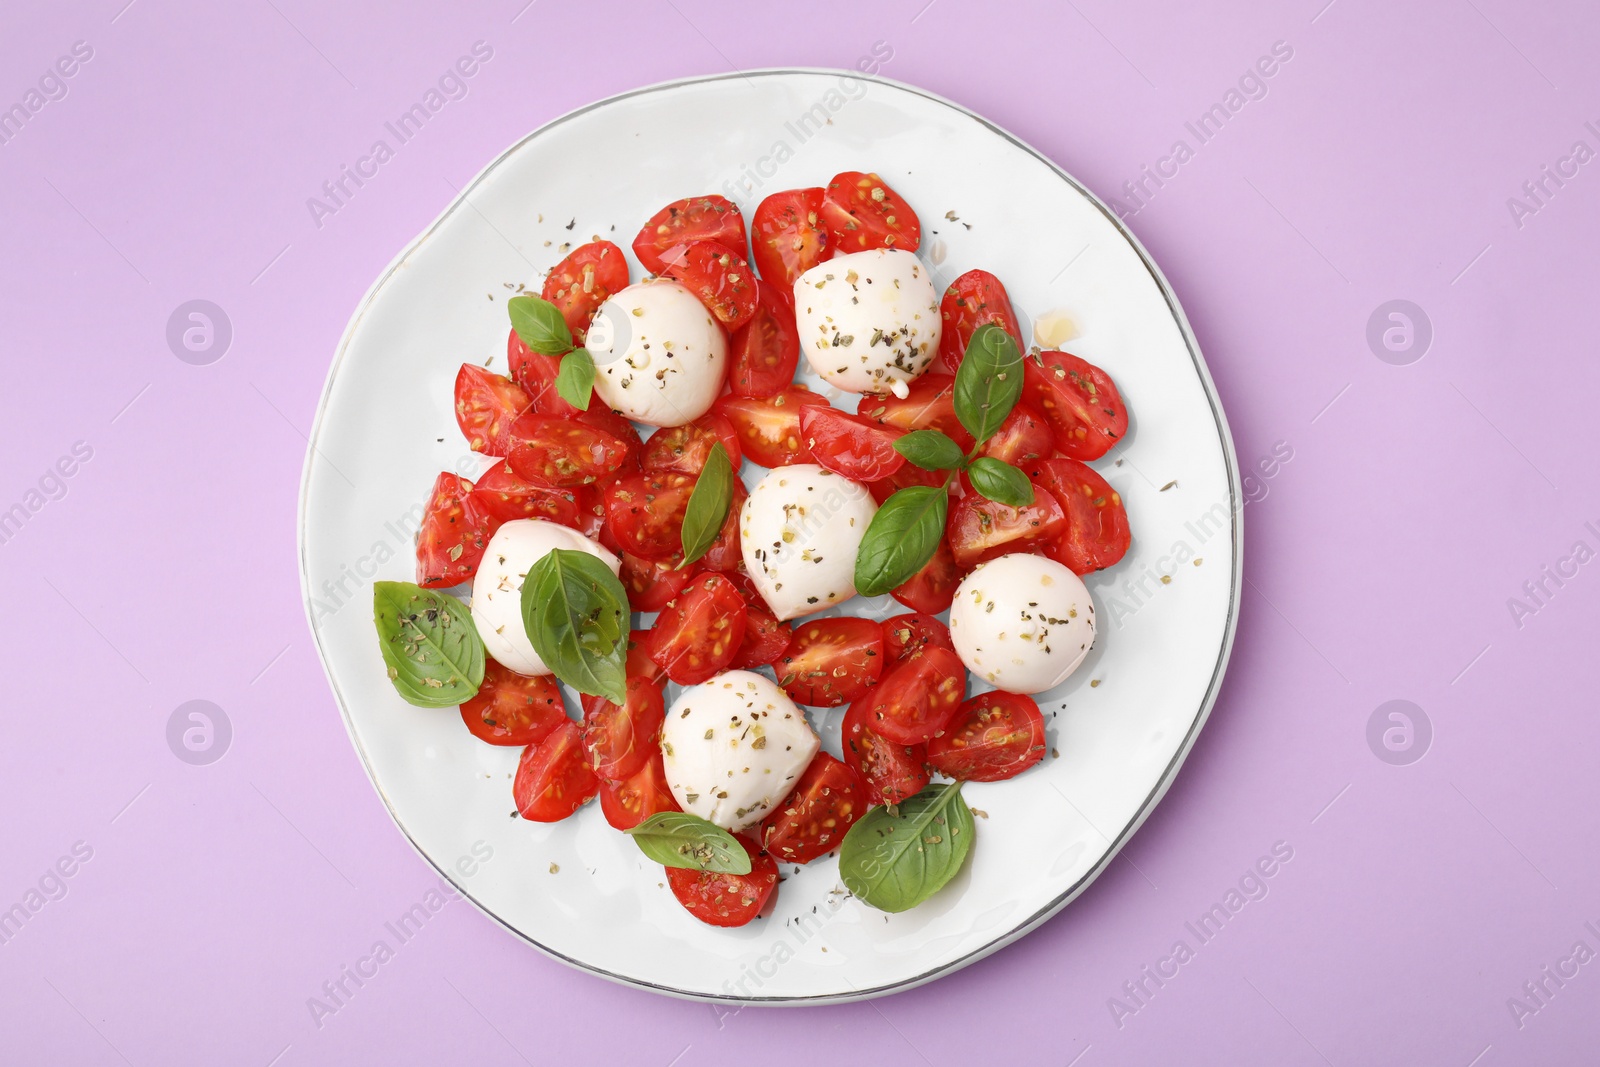 Photo of Tasty salad Caprese with tomatoes, mozzarella balls and basil on lilac background, top view